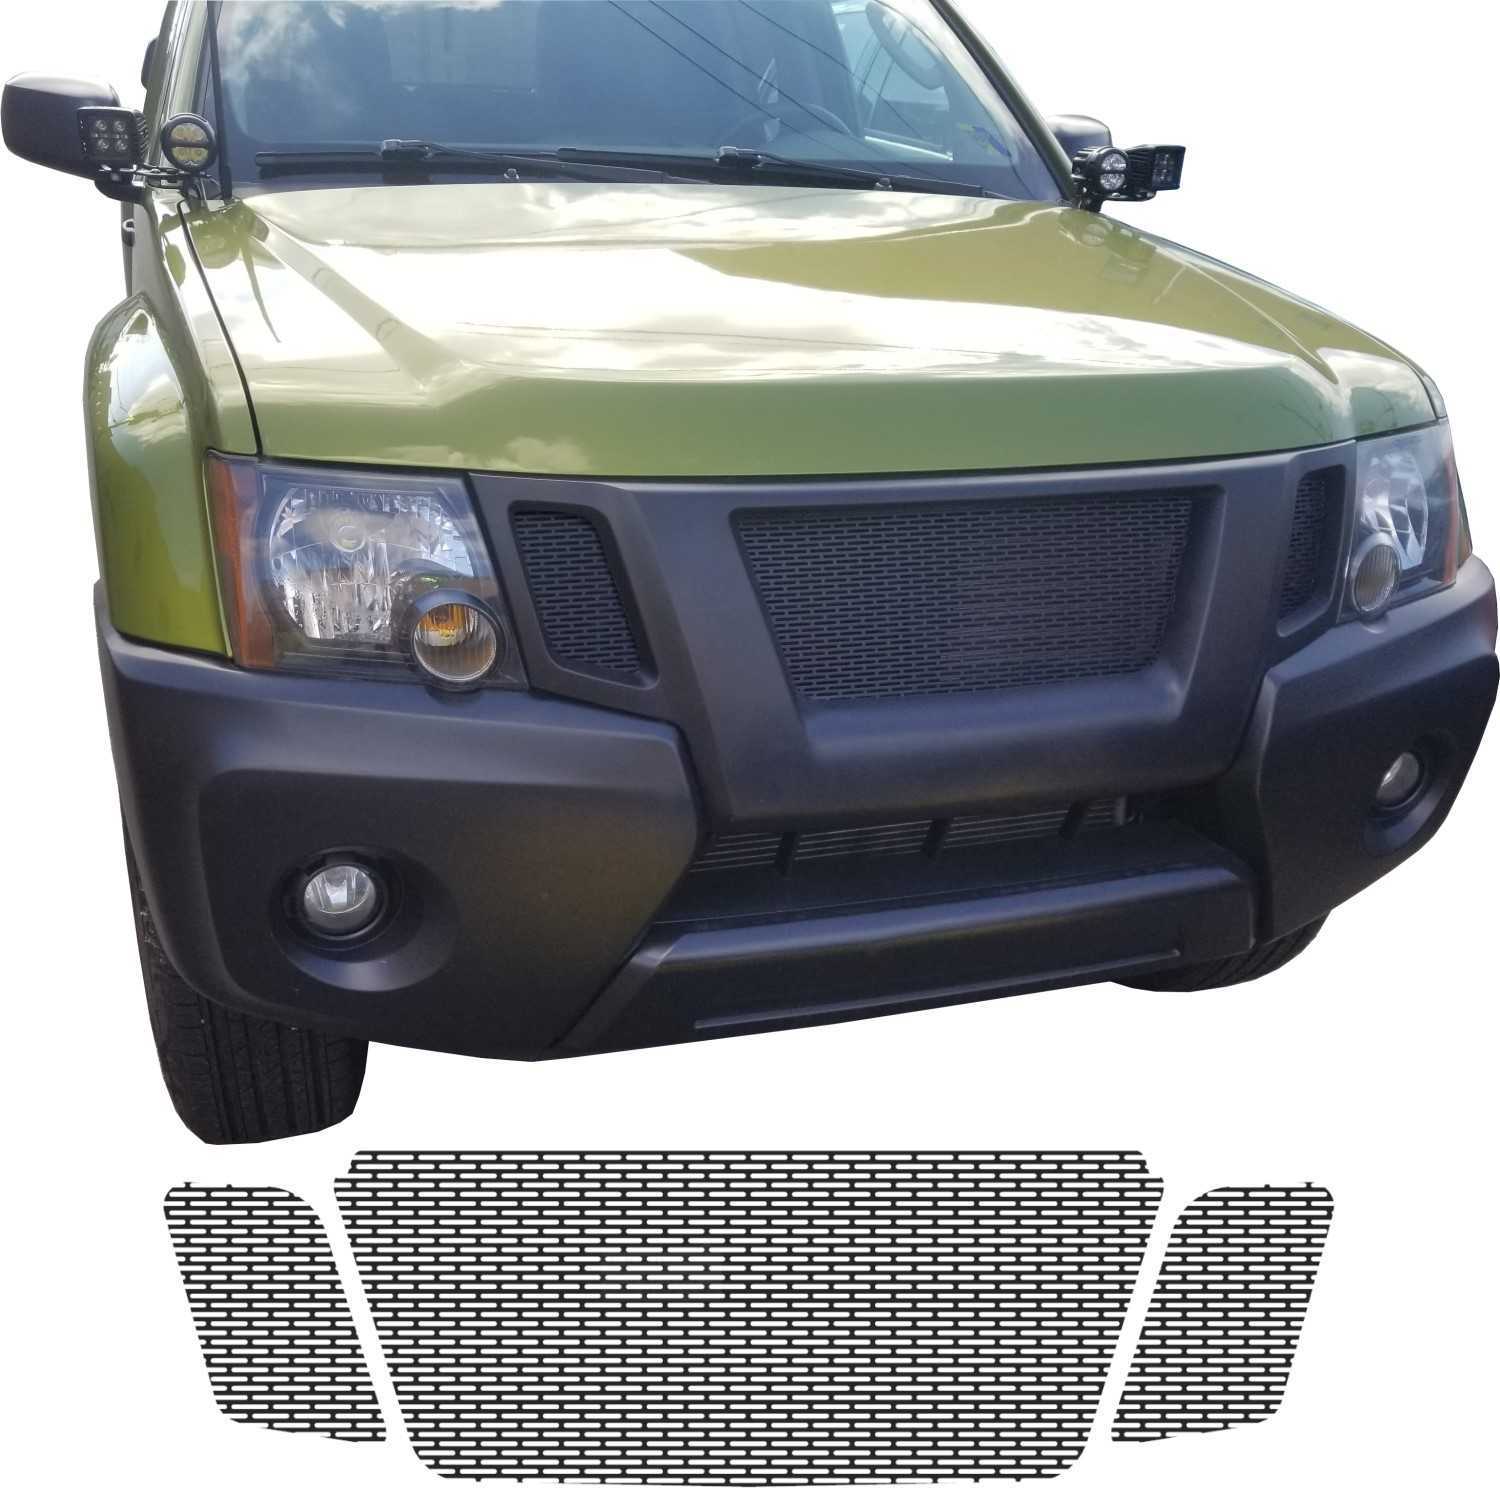 Introducing Our Newest Product: Slotted Mesh Grilles for Your 2009+ Nissan Xterra